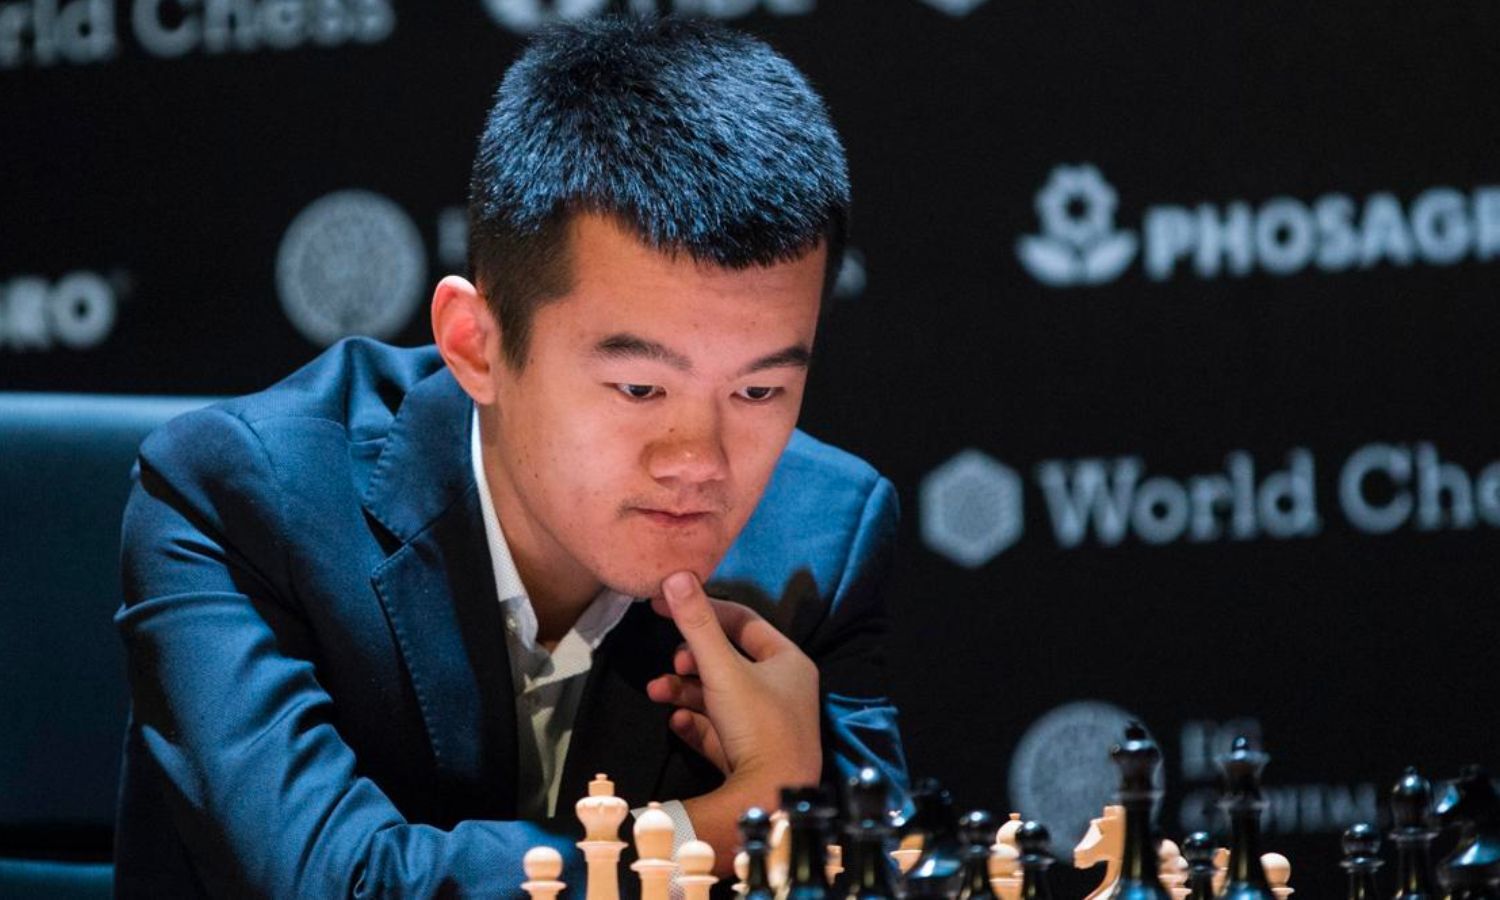 Ding Liren reveals the Chinese Team will not play in the 44th Chess  Olympiad 2022 – Chessdom